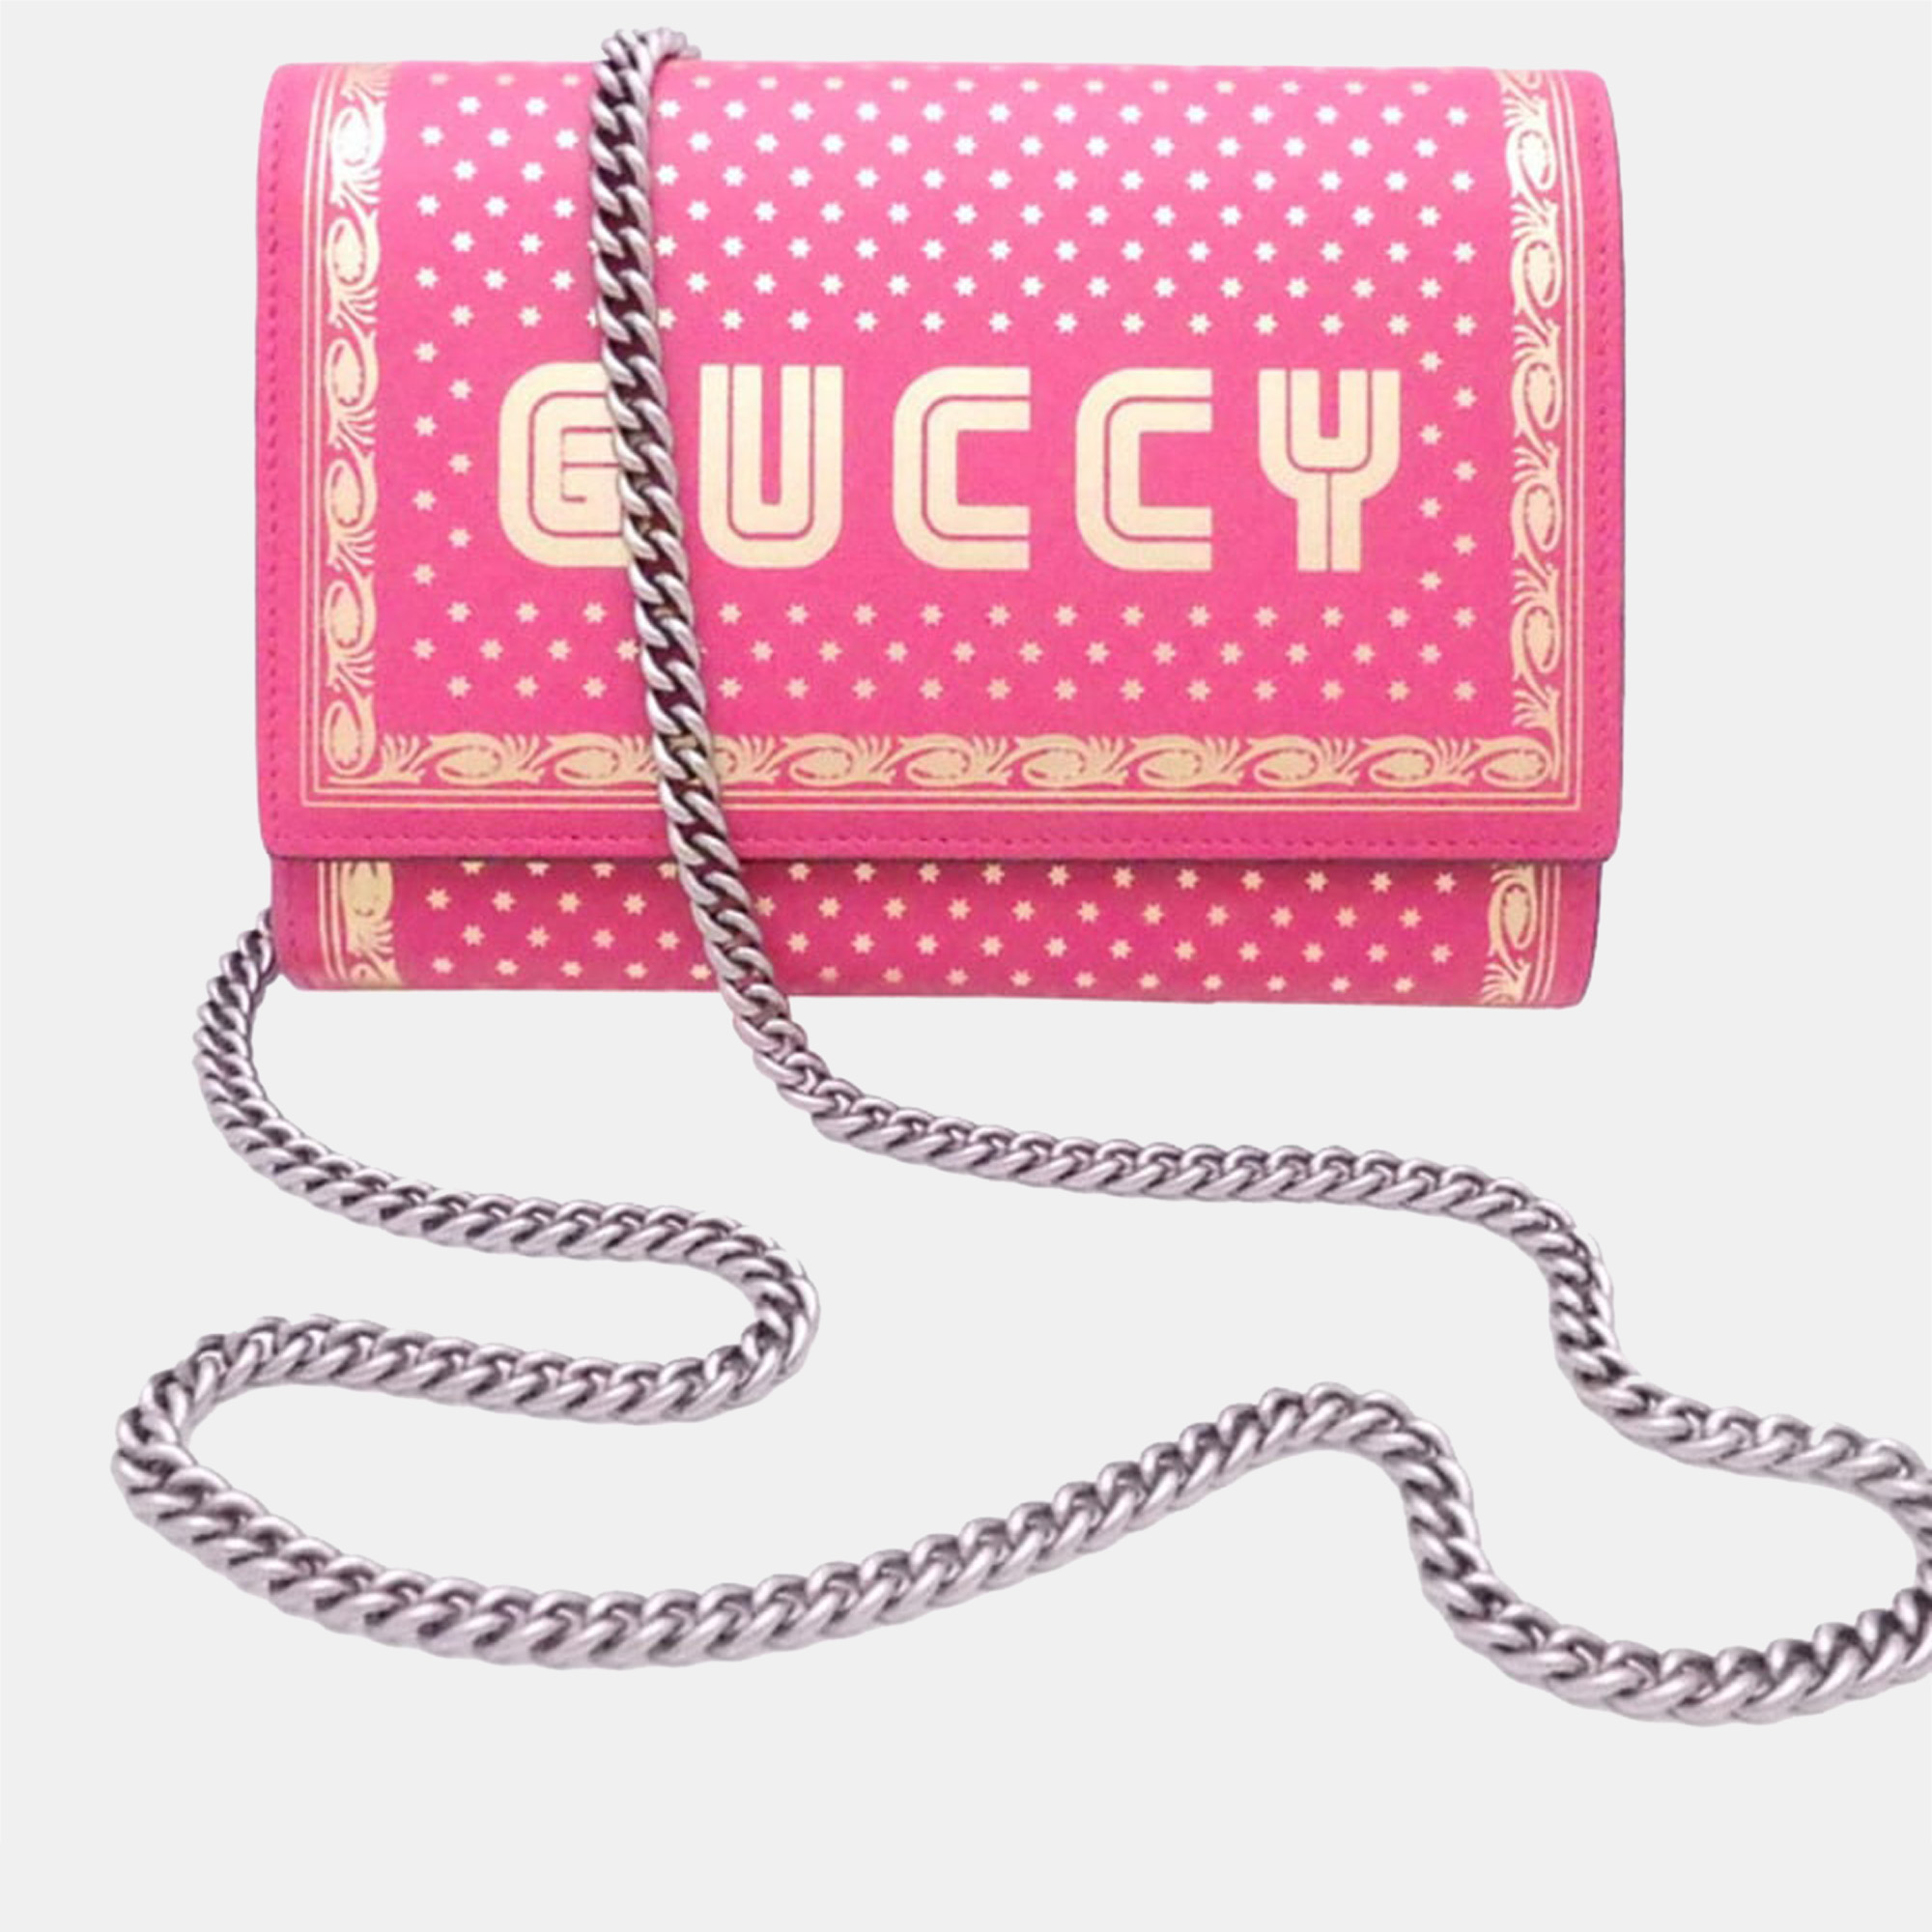 Gucci pink leather limited edition printed guccy wallet on chain